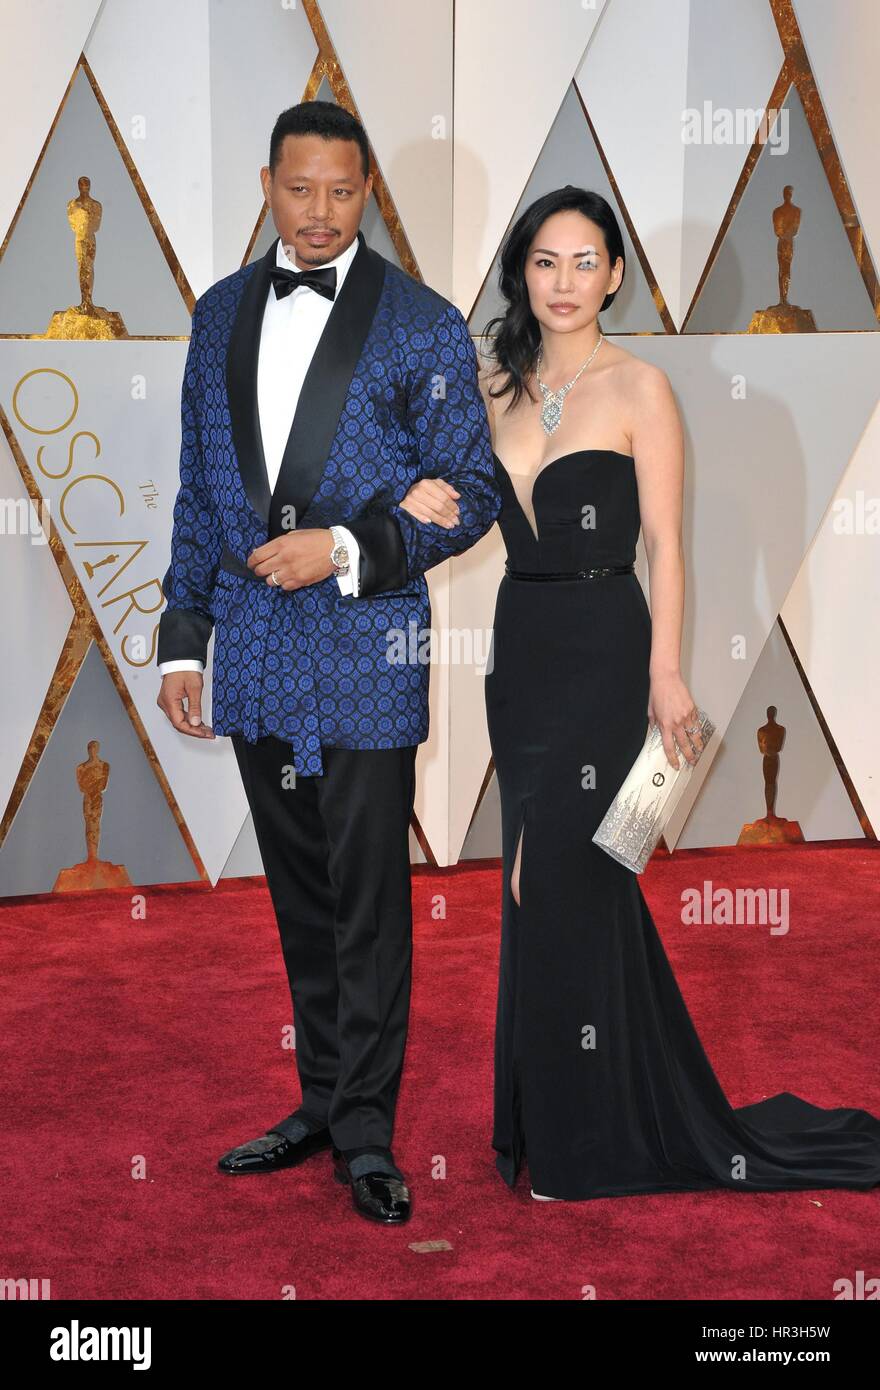 Los Angeles, CA, USA. 26th Feb, 2017. Terrence Howard, Miranda Pak at arrivals for The 89th Academy Awards Oscars 2017 - Arrivals 1, The Dolby Theatre at Hollywood and Highland Center, Los Angeles, CA February 26, 2017. Credit: Elizabeth Goodenough/Everett Collection/Alamy Live News Stock Photo